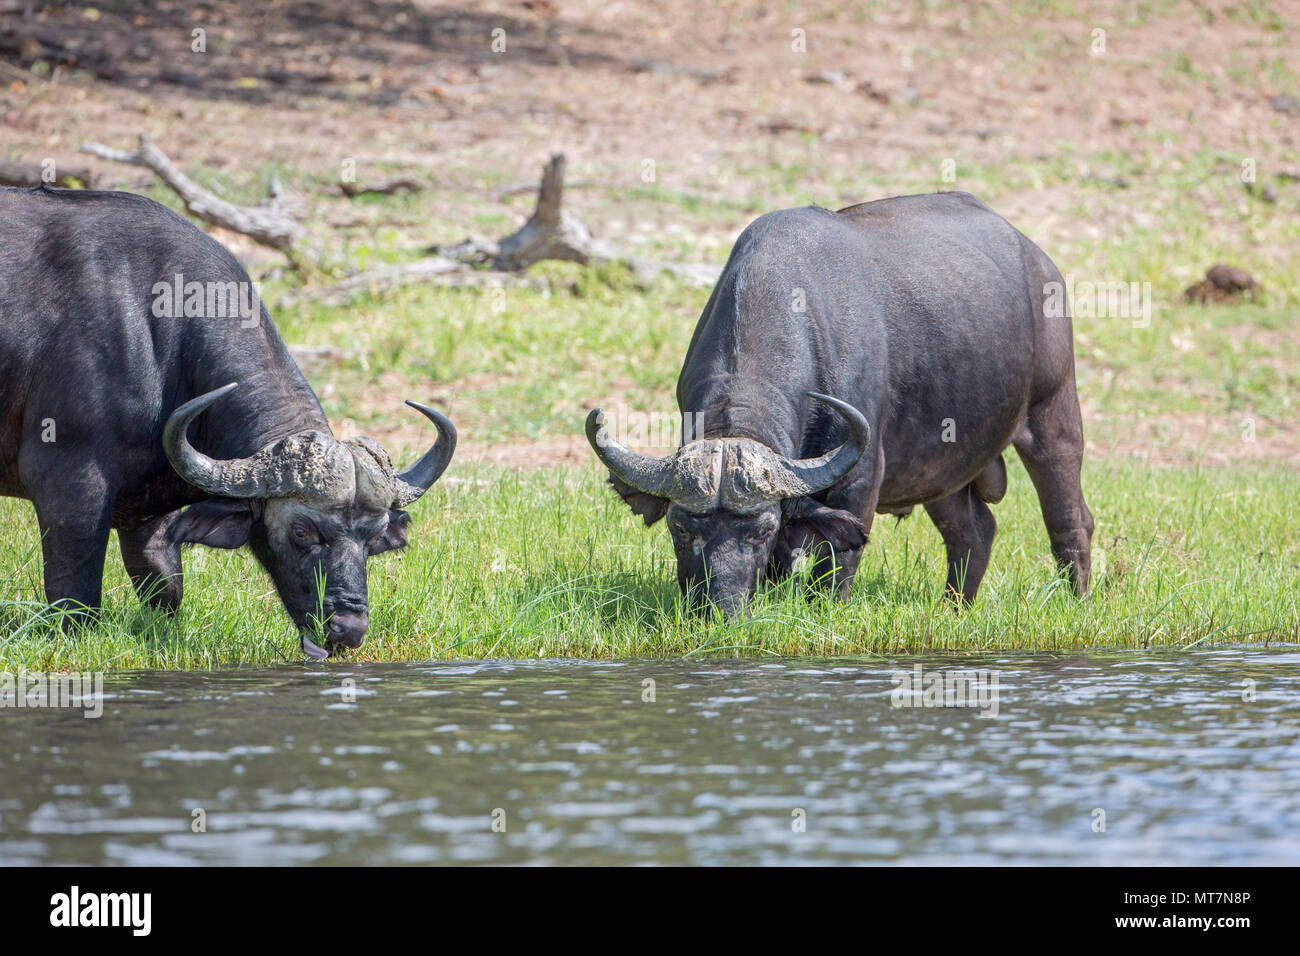 African Buffalo (Syncerus caffer). Bulls or males. Eating coarse, old grass in doing so expose the more tender grass shoots for other grazing species. Stock Photo